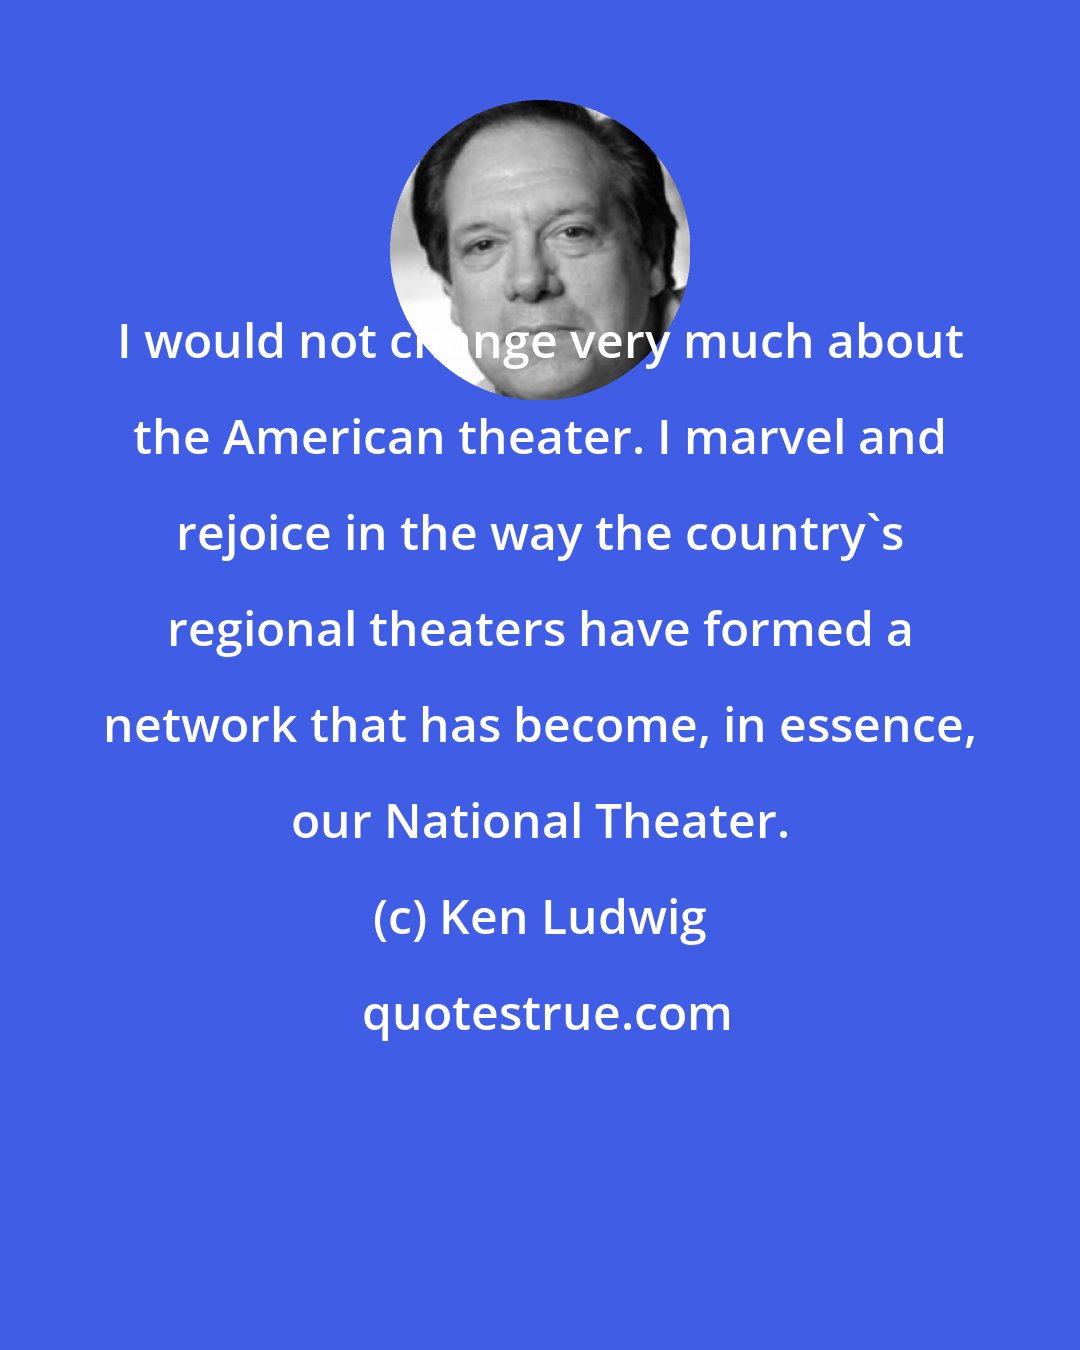 Ken Ludwig: I would not change very much about the American theater. I marvel and rejoice in the way the country's regional theaters have formed a network that has become, in essence, our National Theater.